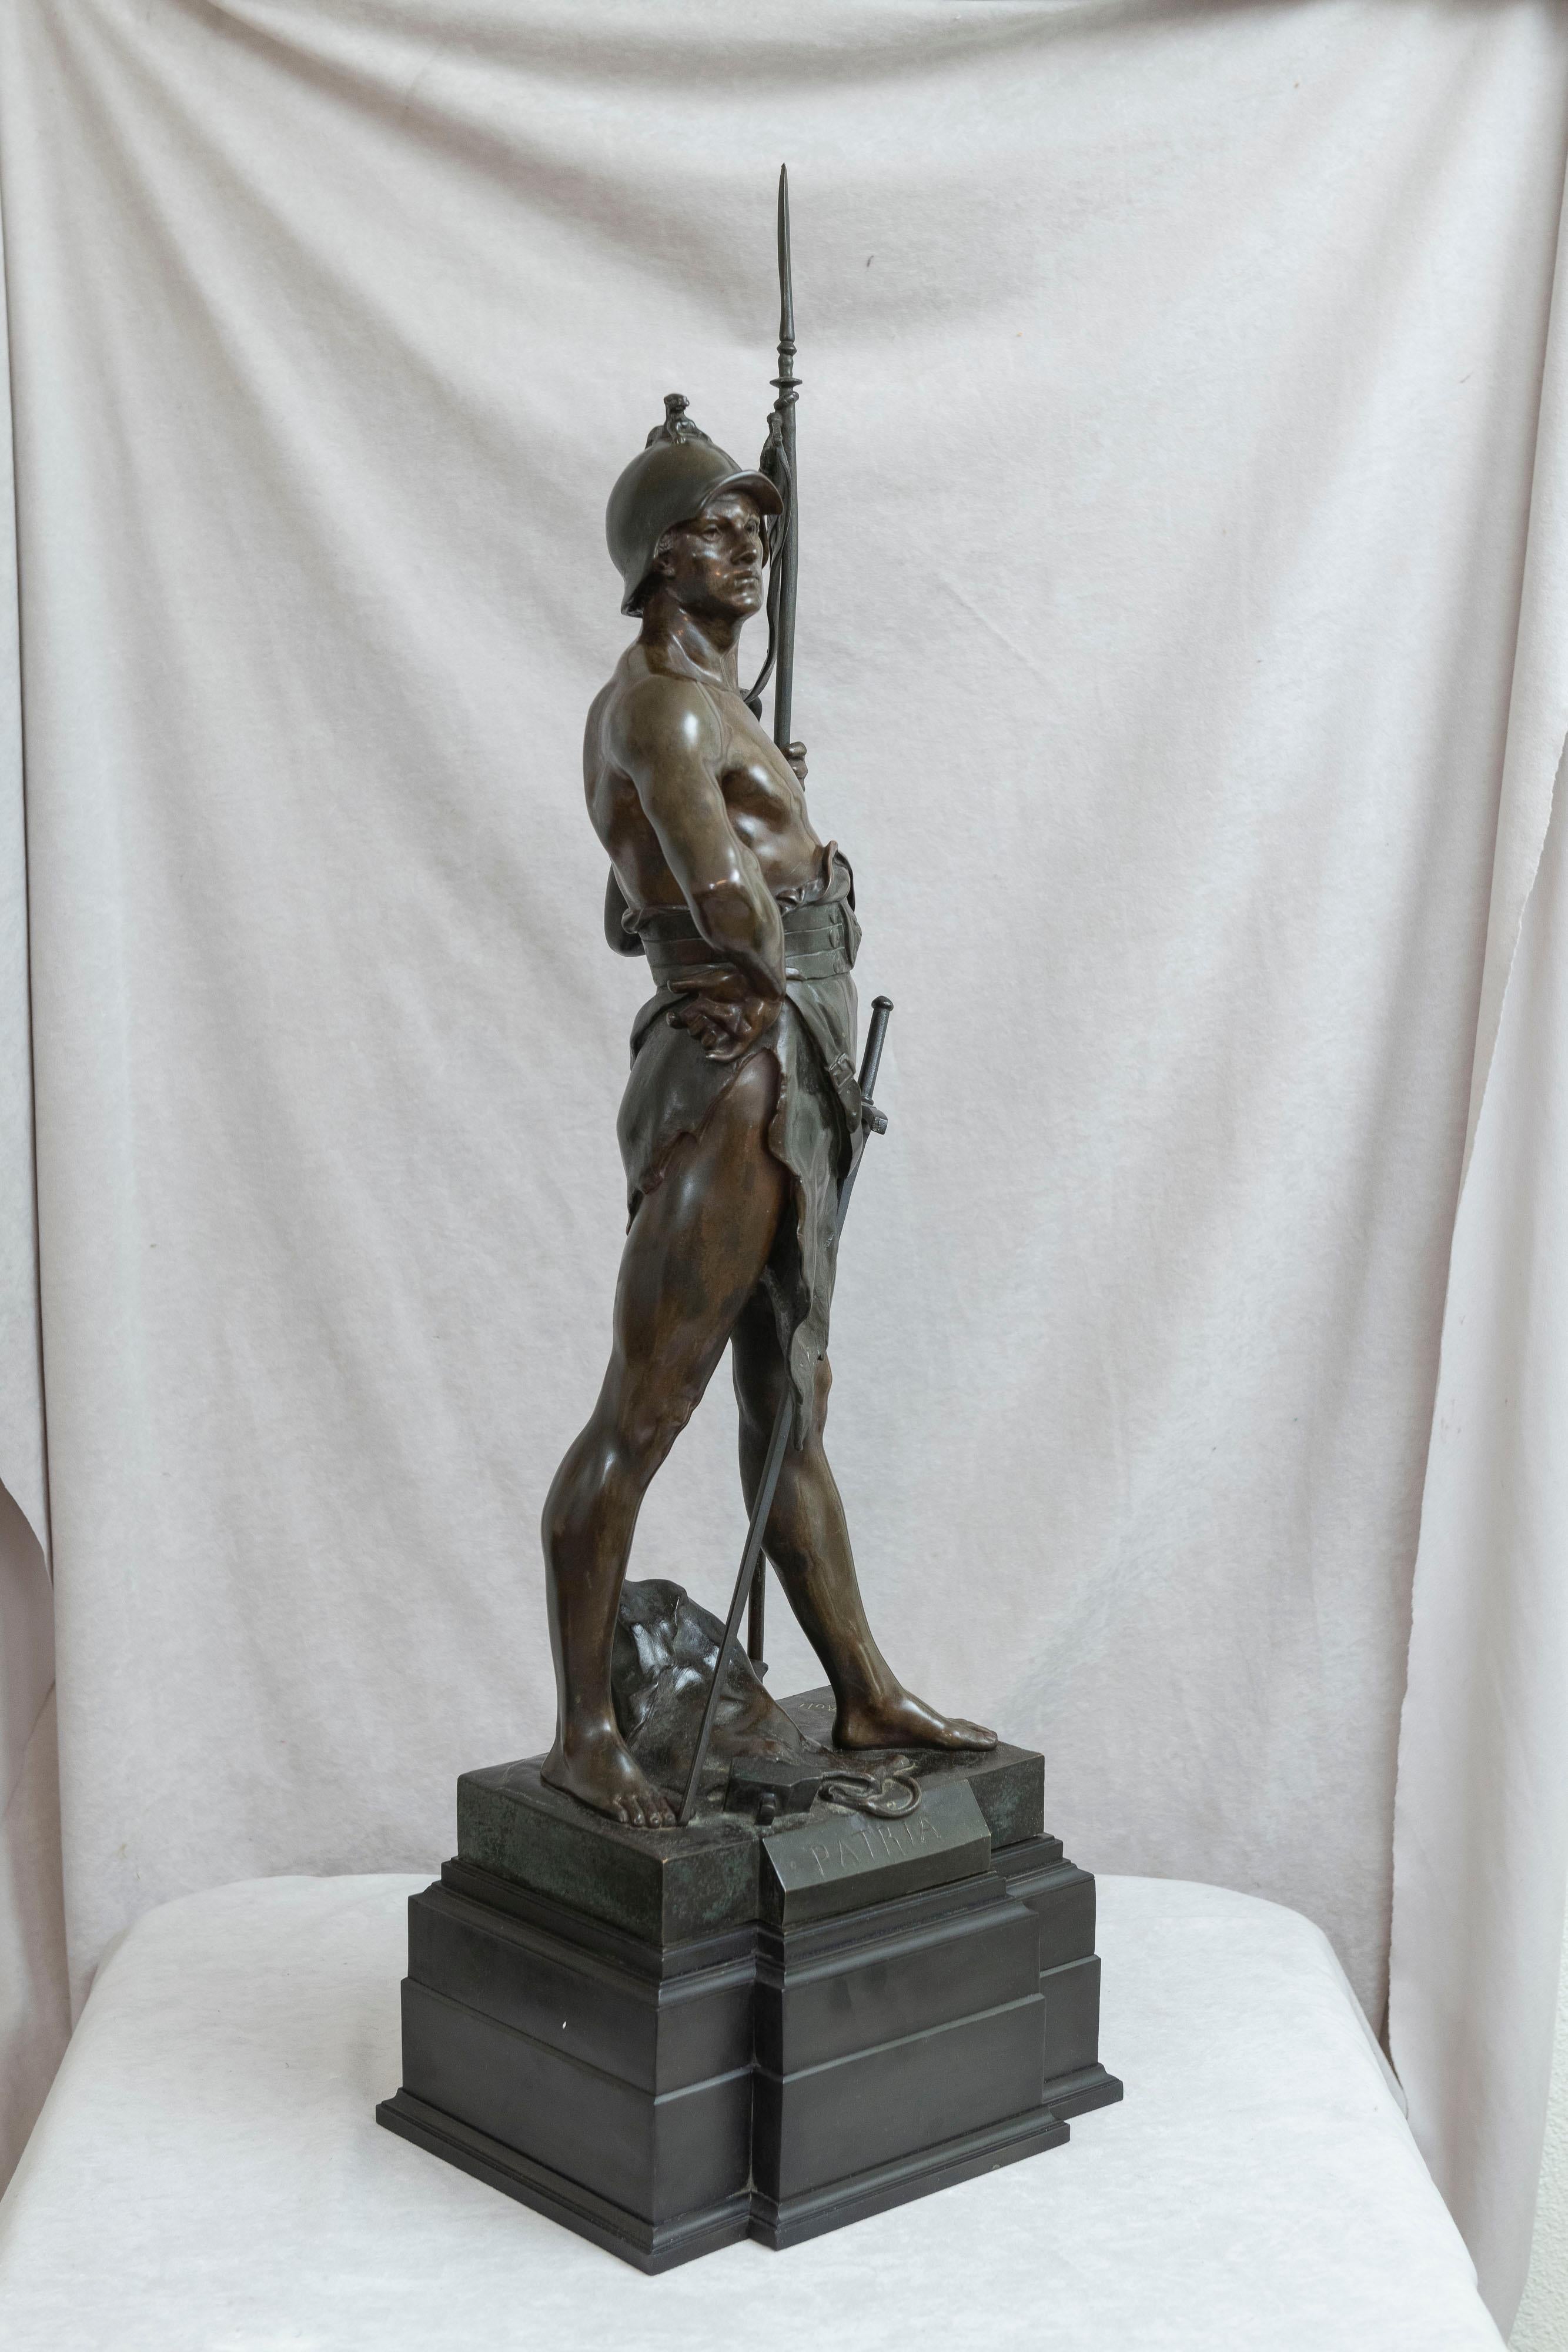 Beaux Arts 19th Century French Bronze of a Warrior, Artist Signed Picault, Titled 